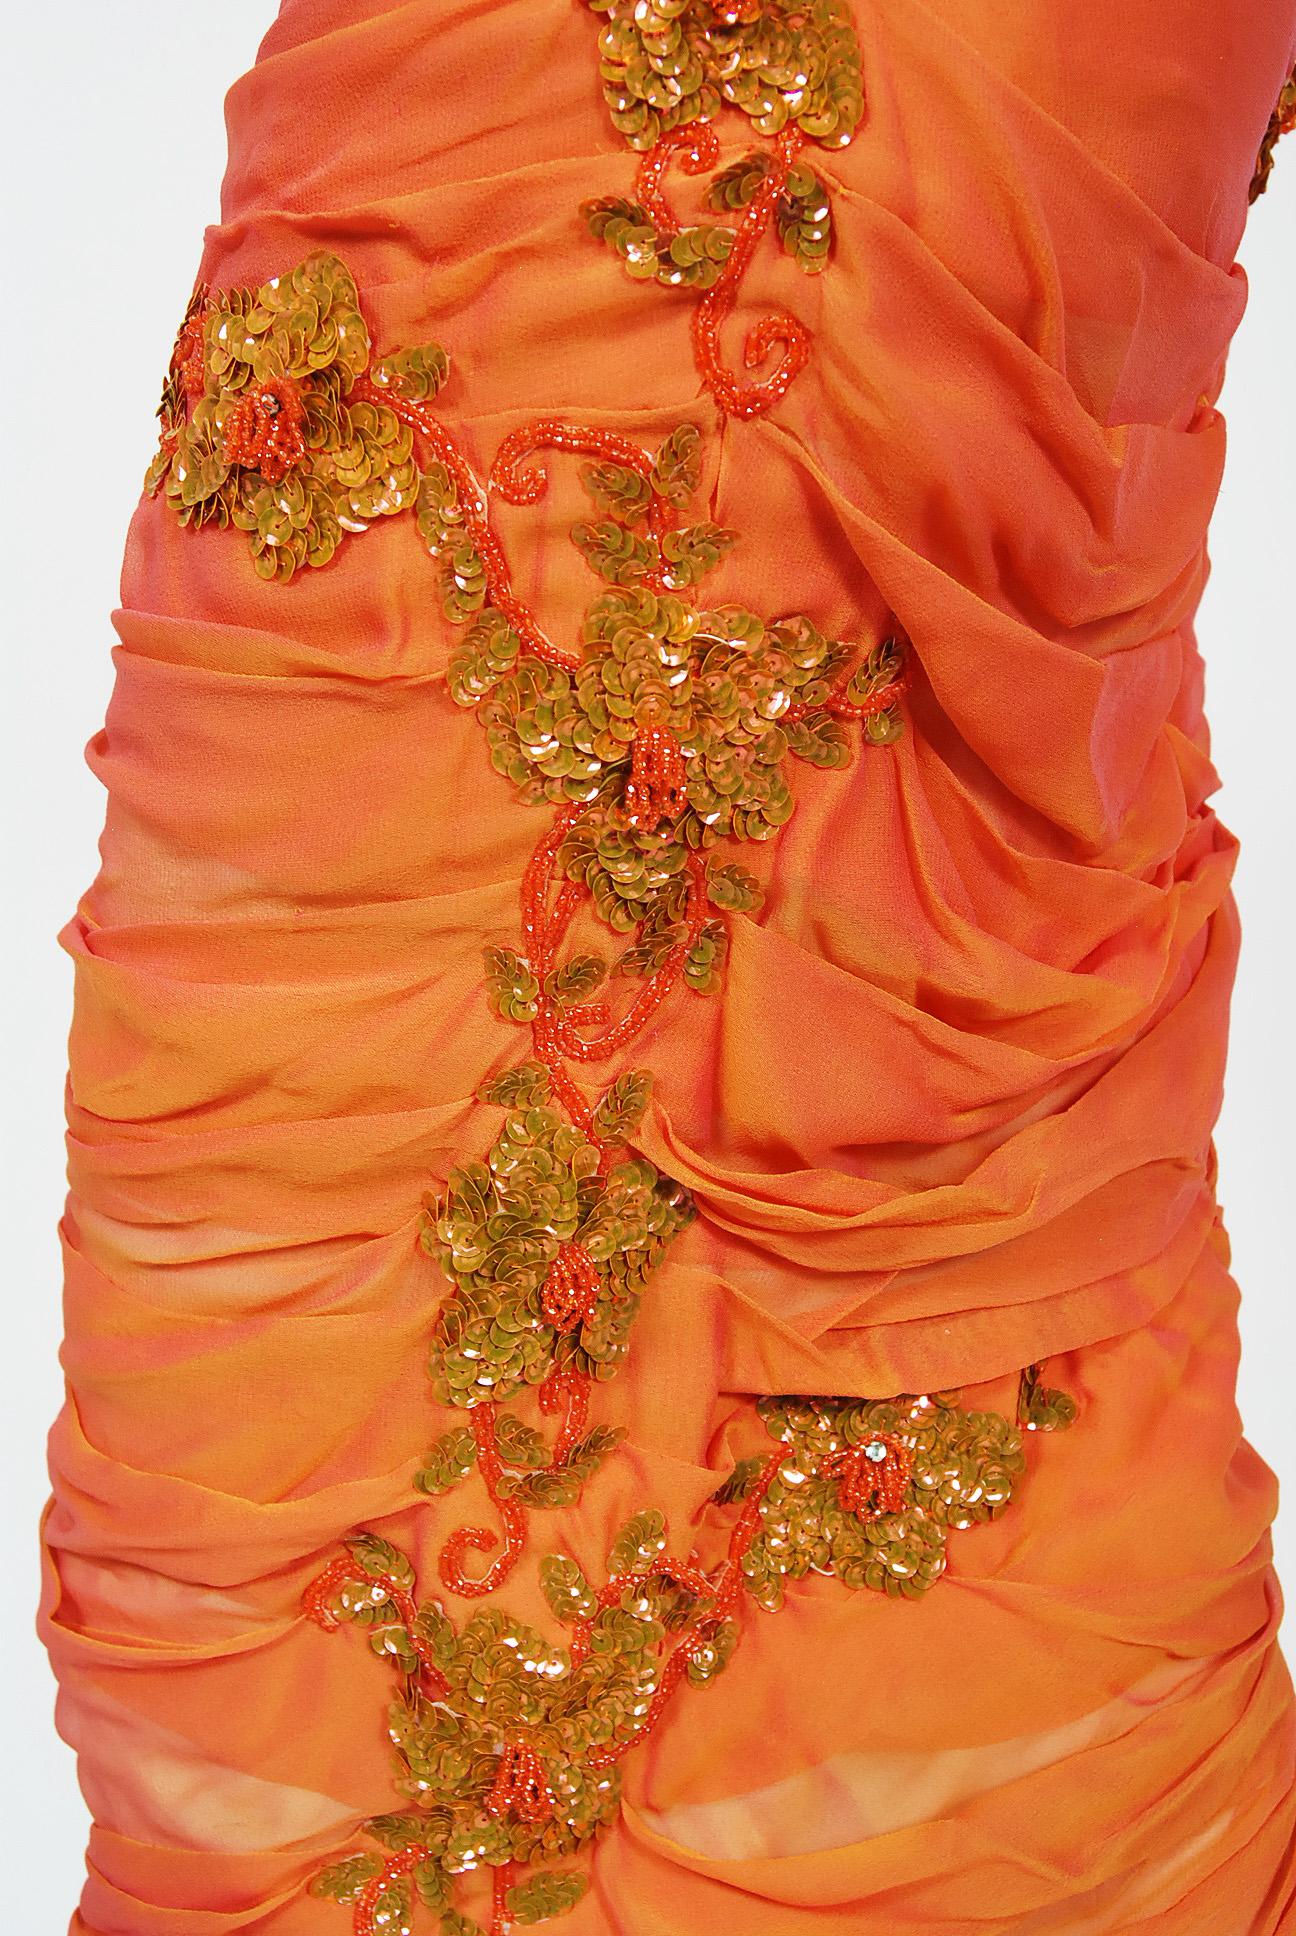 Vintage 1950s Orange Beaded Appliqué Ruched Chiffon Hourglass Old Hollywood Gown 4